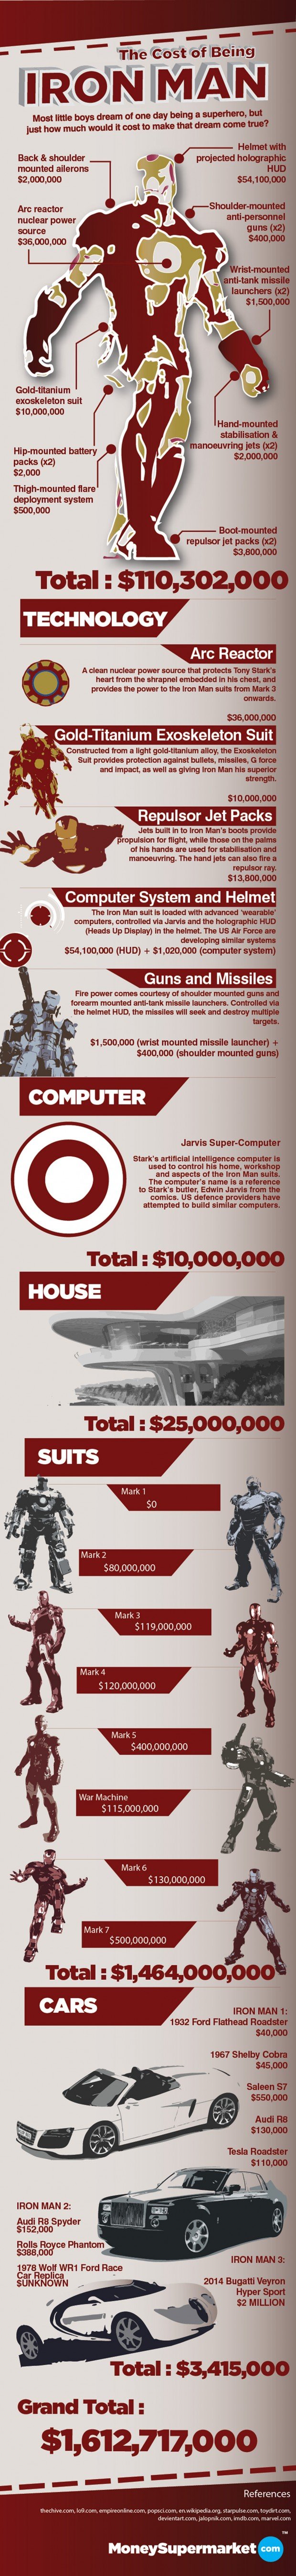 The Cost of Being Iron Man [Infographic]